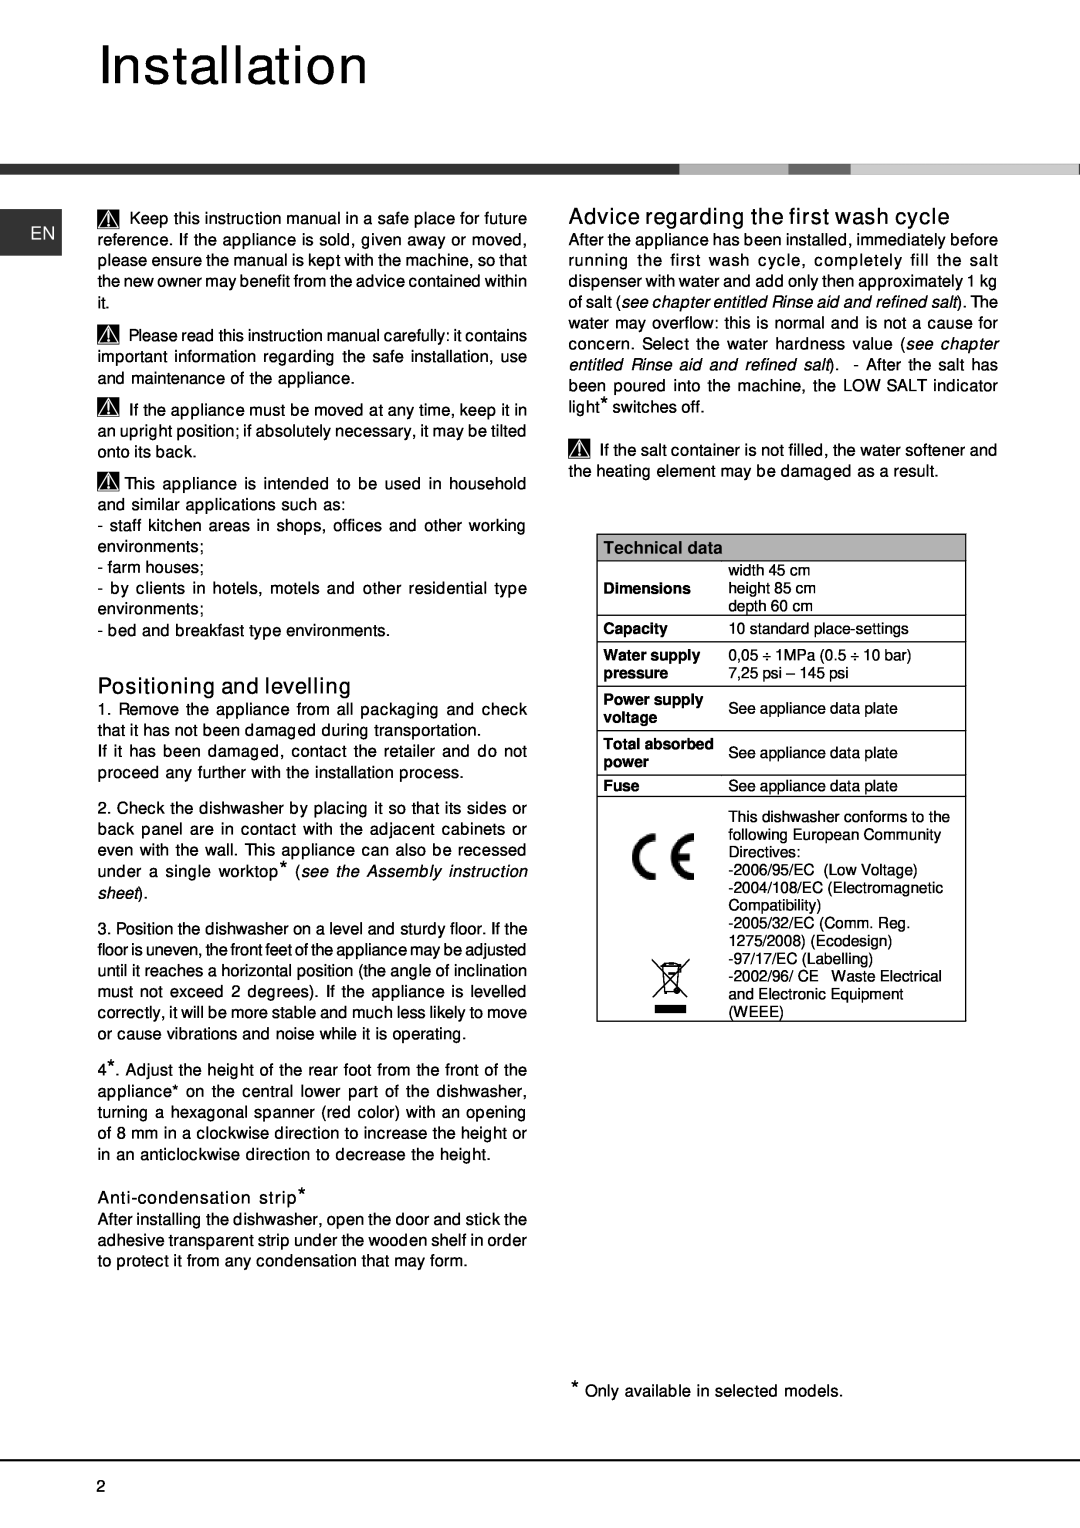 Hotpoint 910 manual Installation, Positioning and levelling, Advice regarding the first wash cycle, Anti-condensation strip 